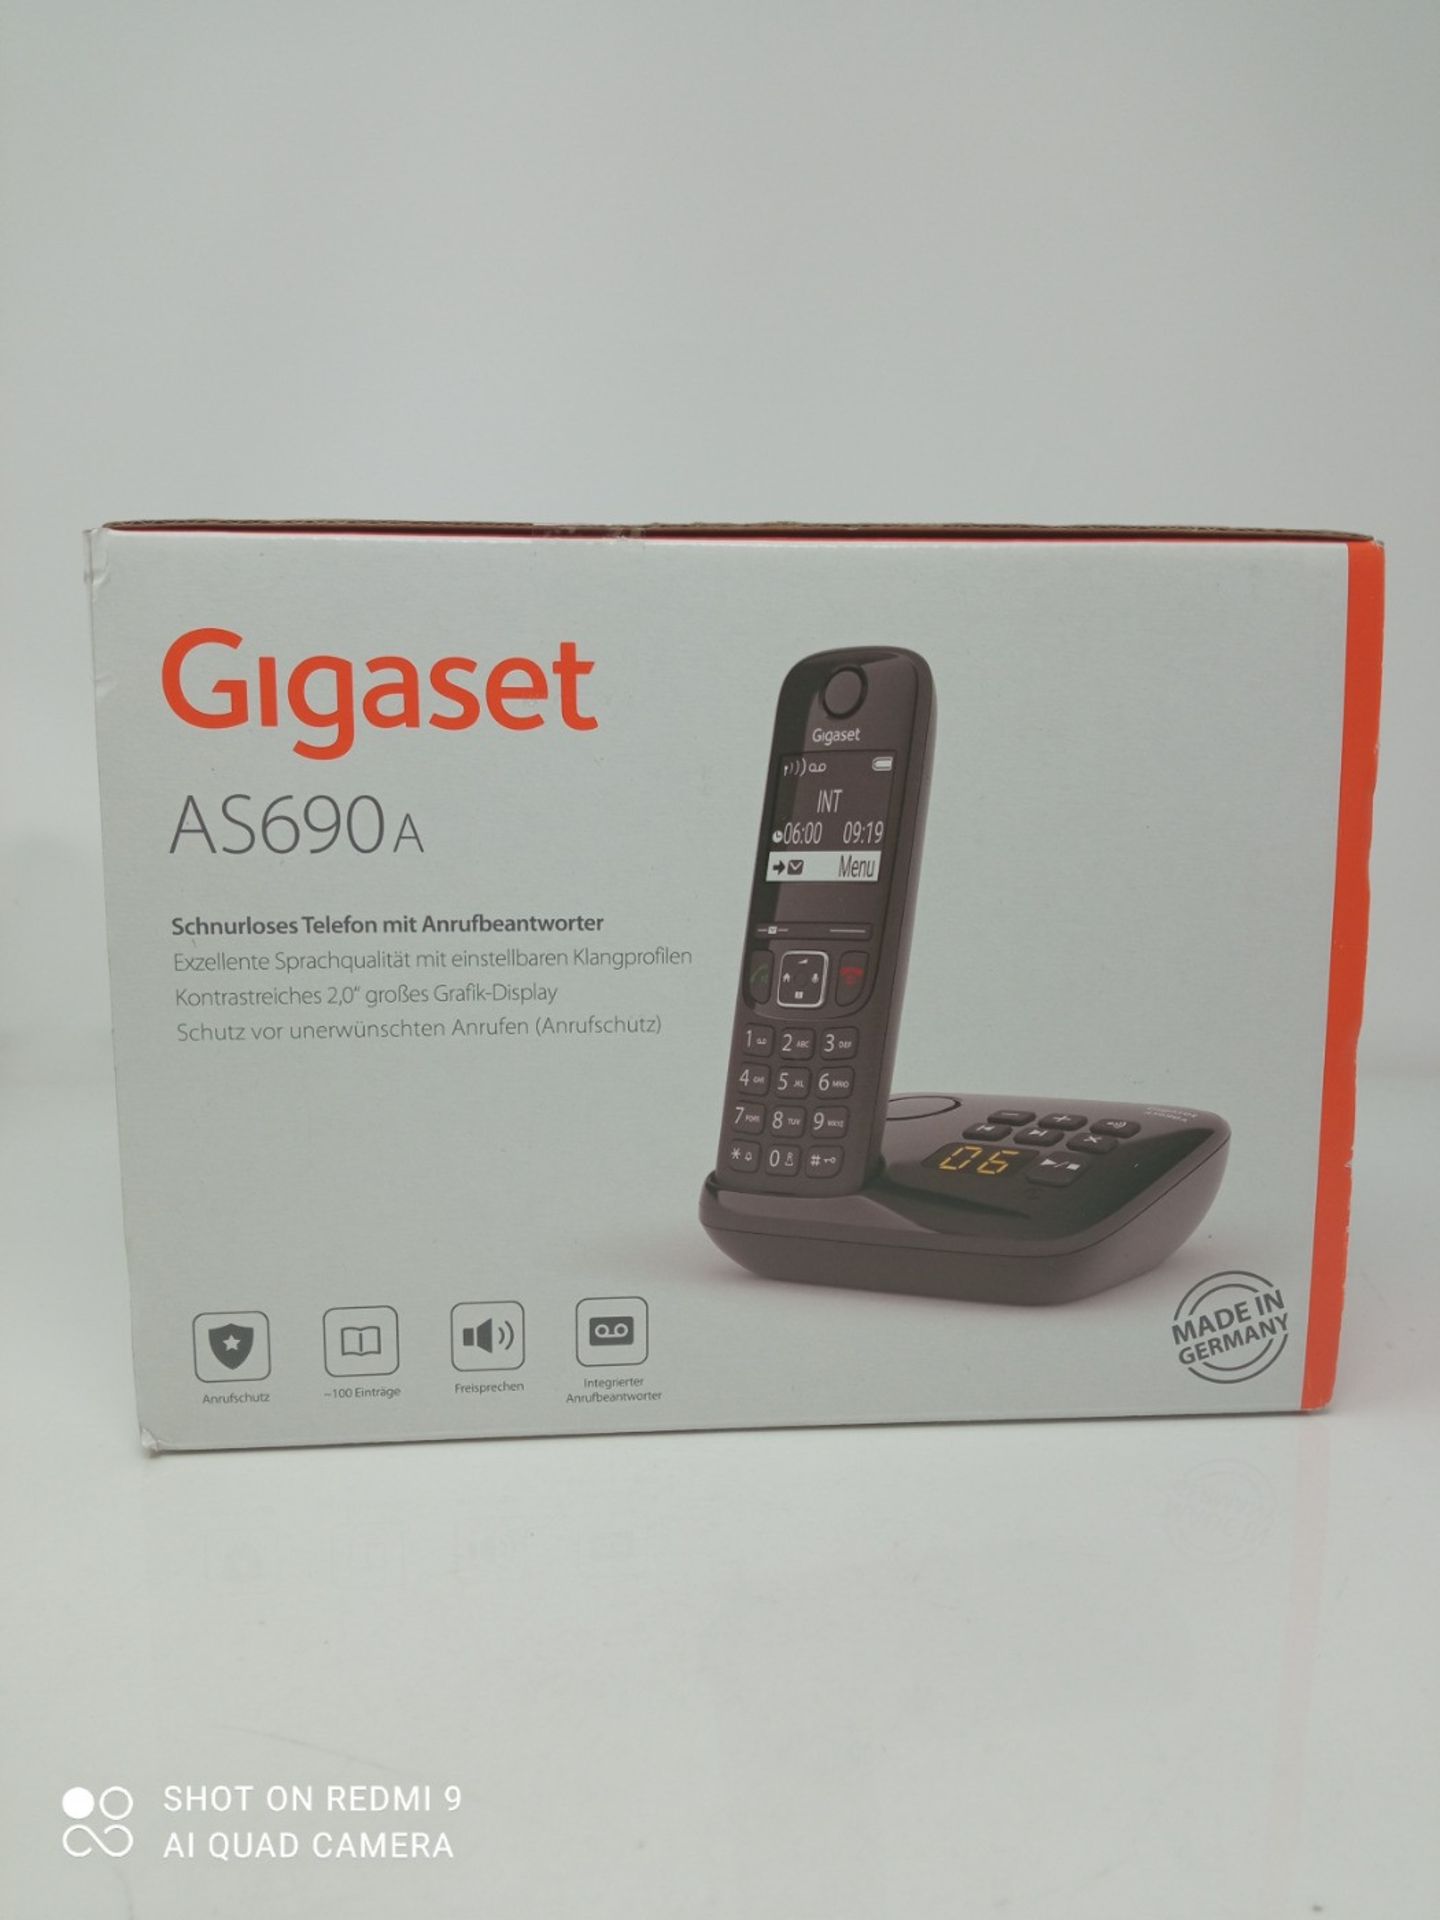 Gigaset AS690A - cordless telephone with answering machine - large, high-contrast disp - Image 2 of 3